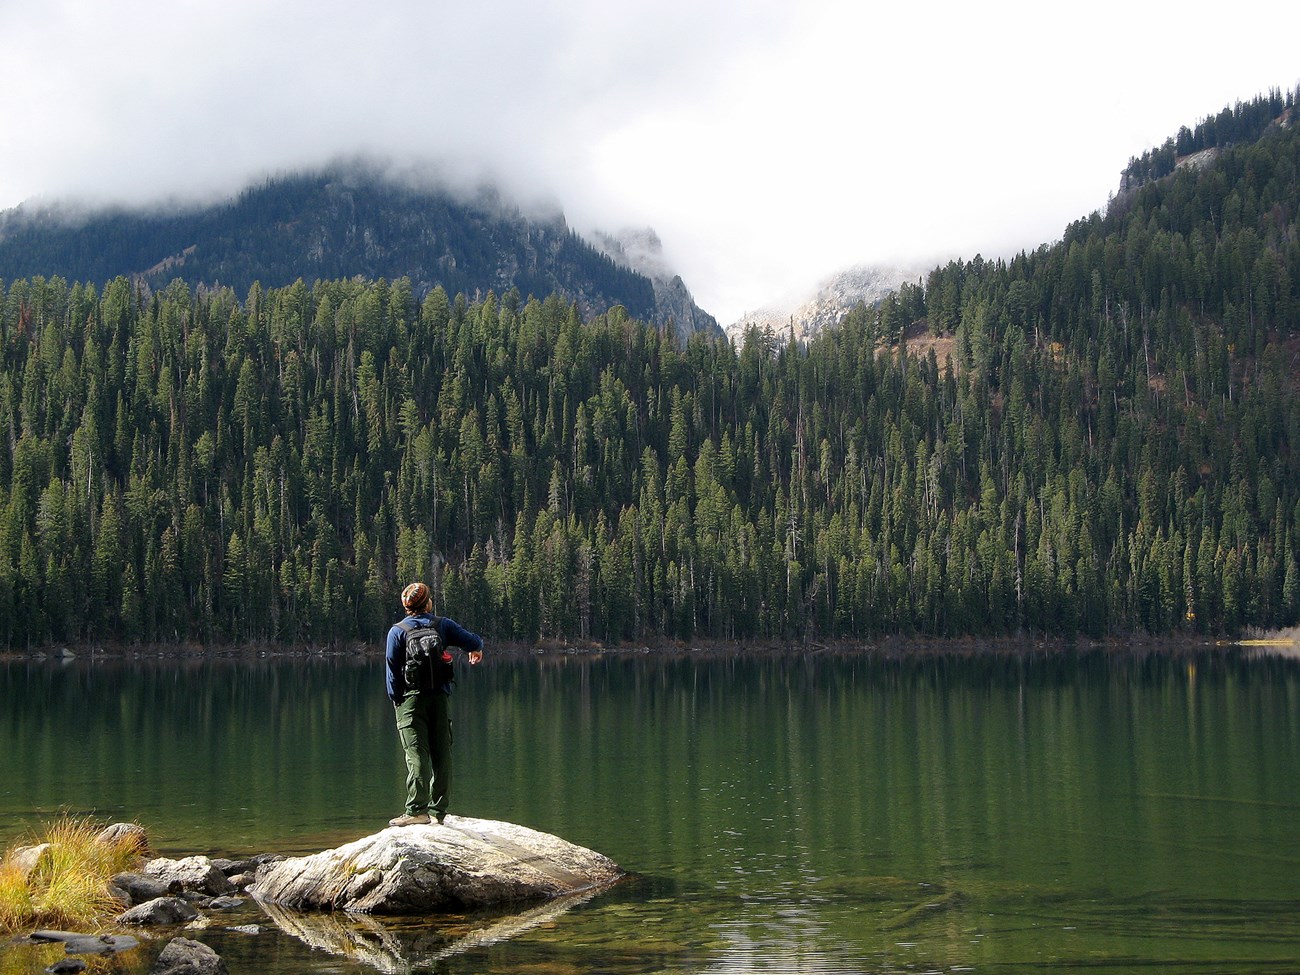 A mountain lake surrounded by forest and steep mountain slopes. A man stands on a rock overlooking the lake.